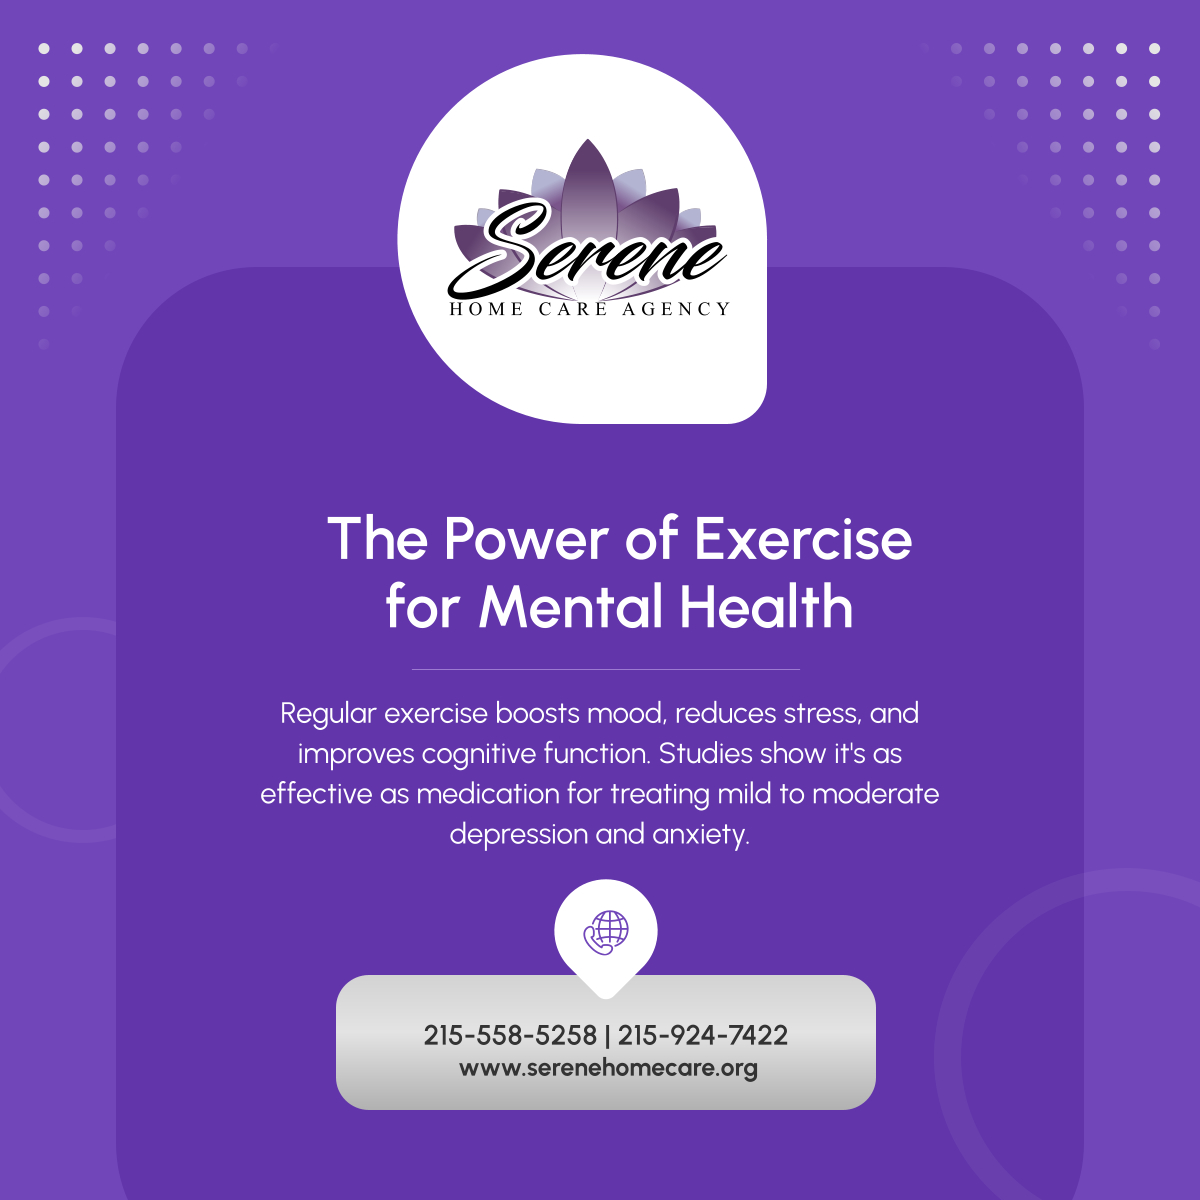 Discover the mental health benefits of exercise! Incorporate physical activity into your routine to boost mood and reduce stress. 

#Homecare #Seniors #HelpAtHome #Quality #InHomeCare #Philadelphia #RegularExercise